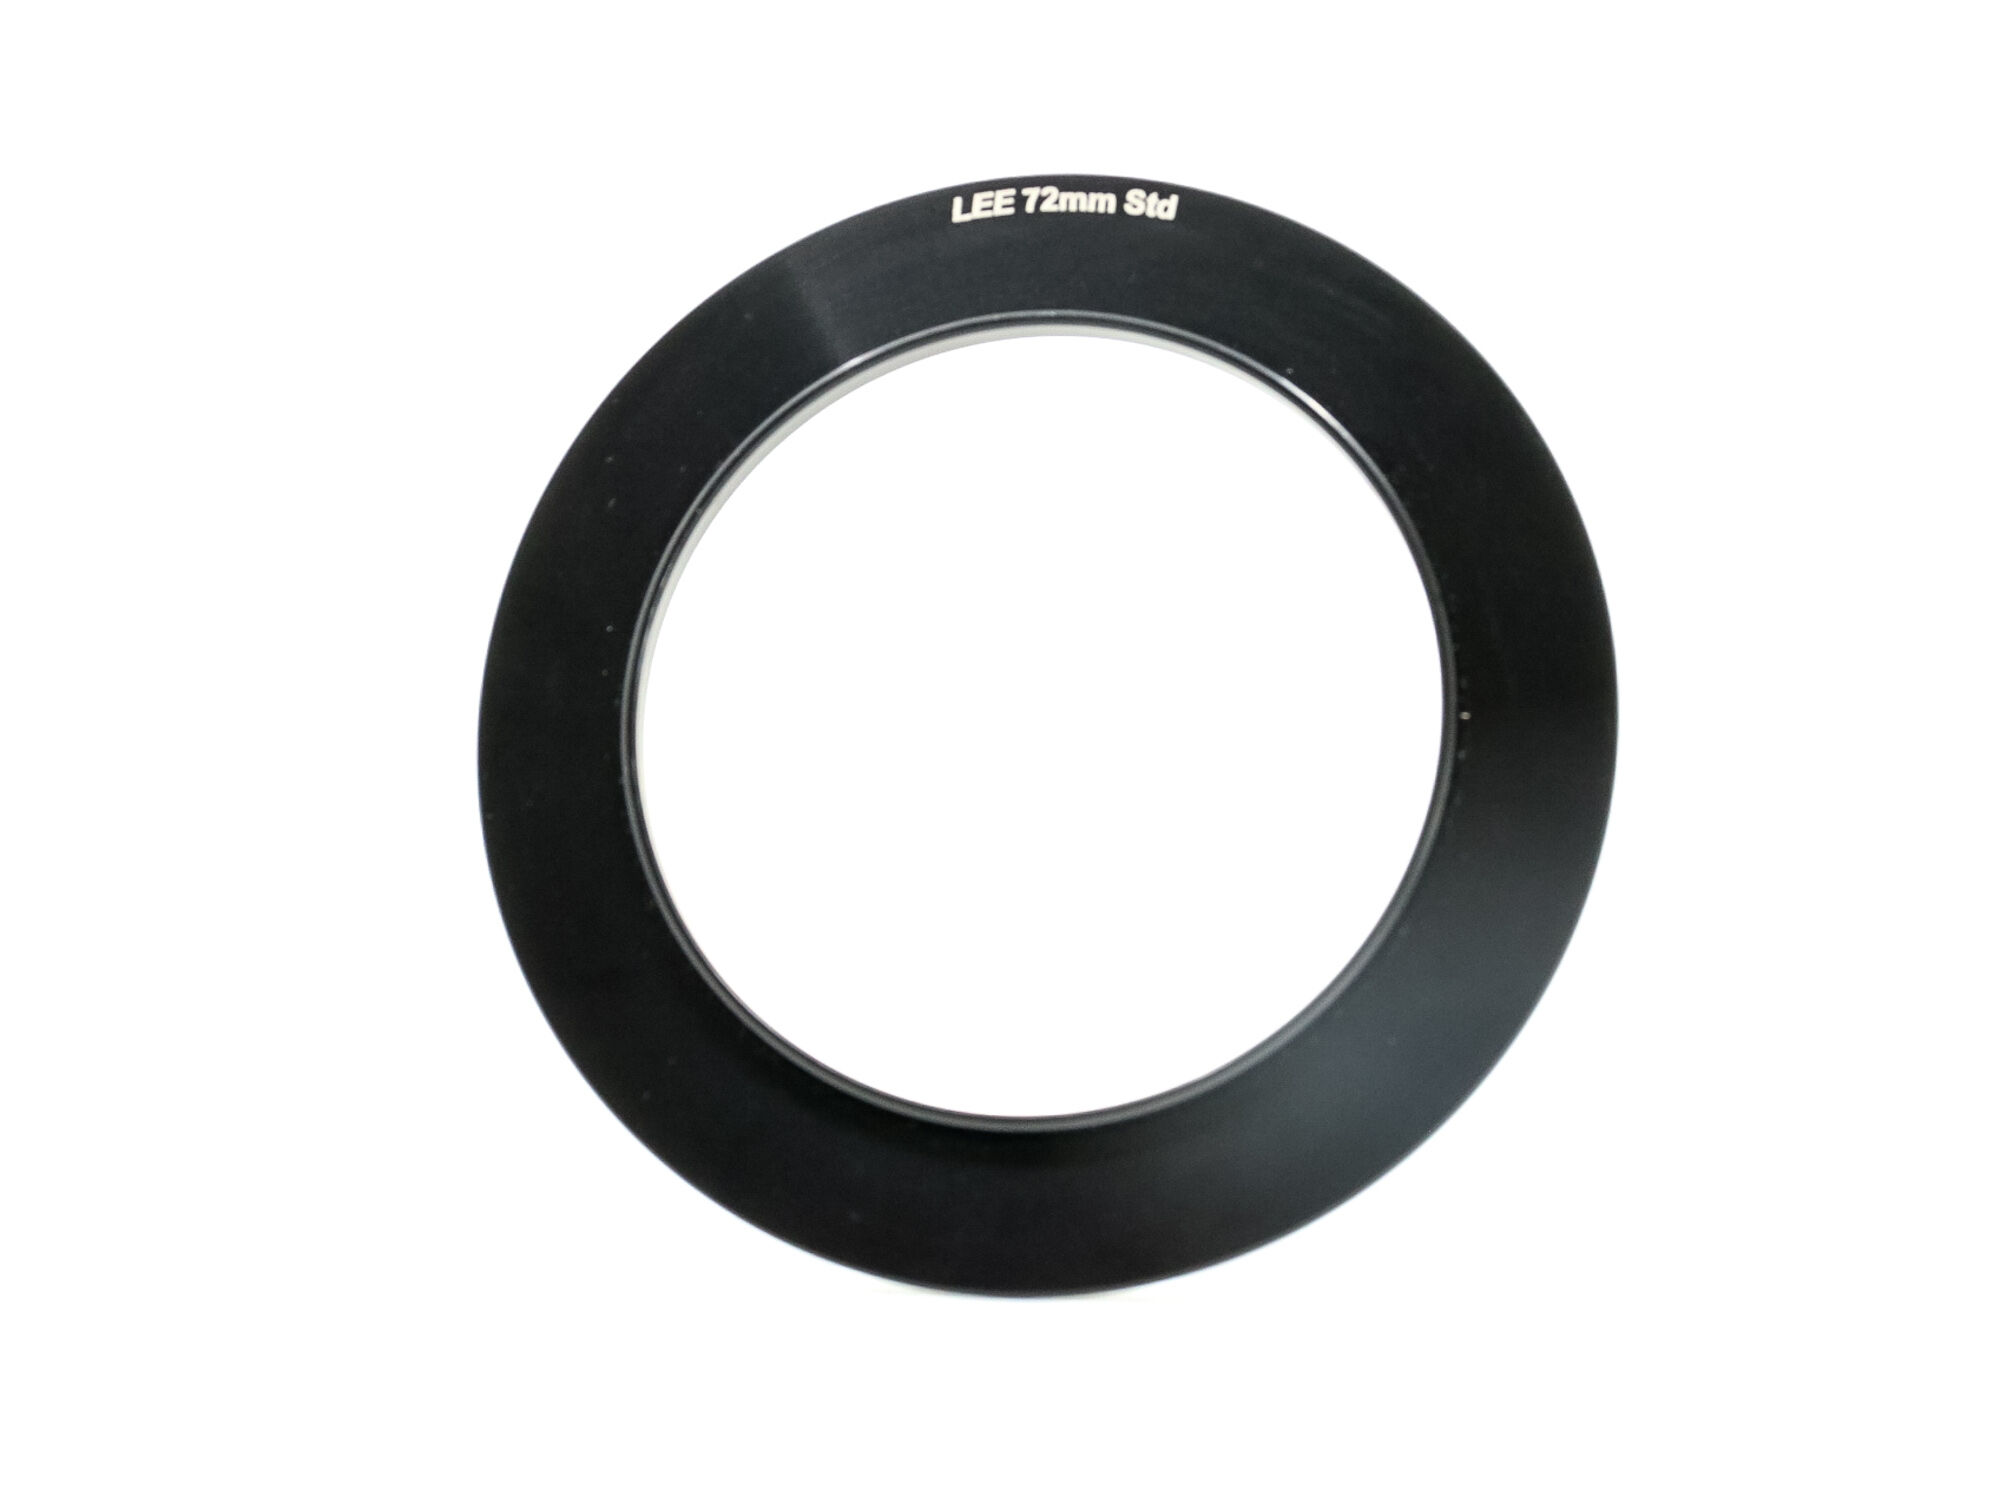 Lee 72mm Adapter Ring (Condition: Excellent)